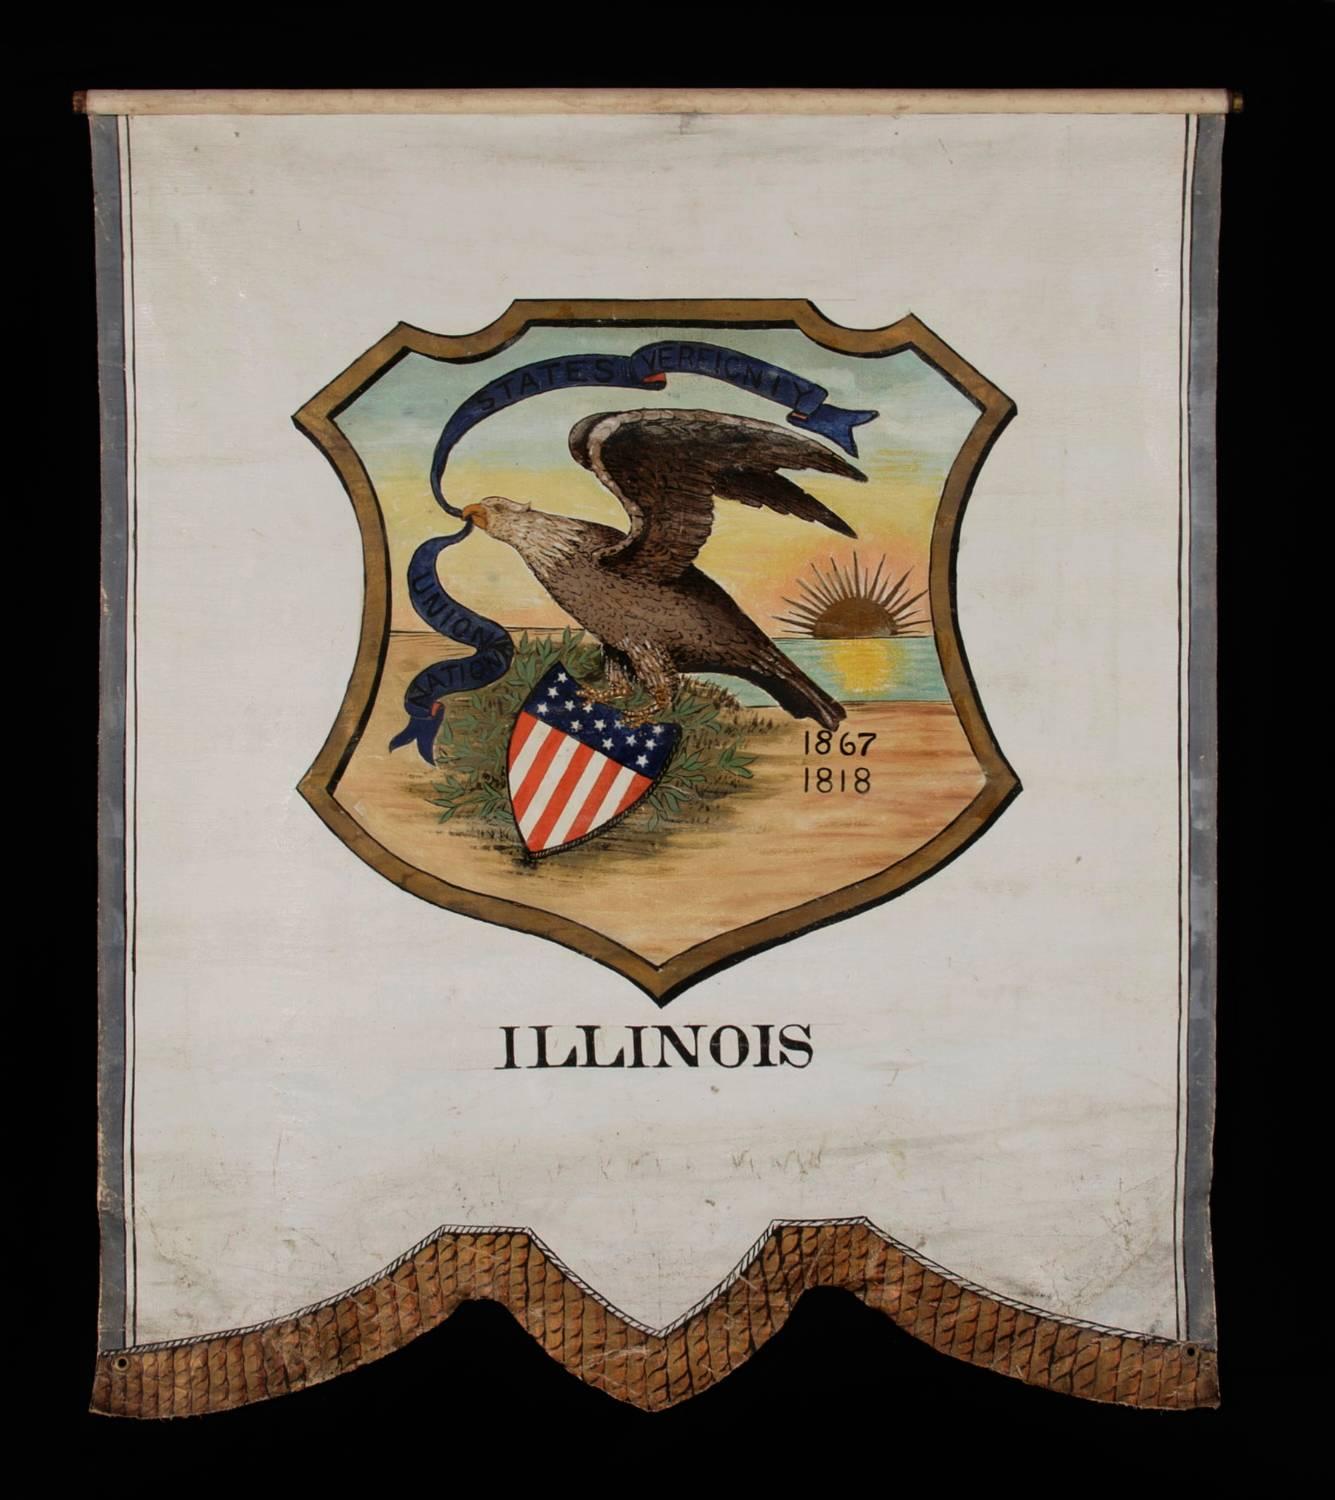 HAND-PAINTED 19TH CENTURY BANNER WITH AN 1867 VERSION OF THE SEAL OF THE STATE OF ILLINOIS, PROPOSED IN THAT YEAR BY THE SECRETARY OF STATE, BUT IN A VARIATION NEVER FORMALLY ADOPTED 

Banner with the Illinois State Seal, in a rare variation of the